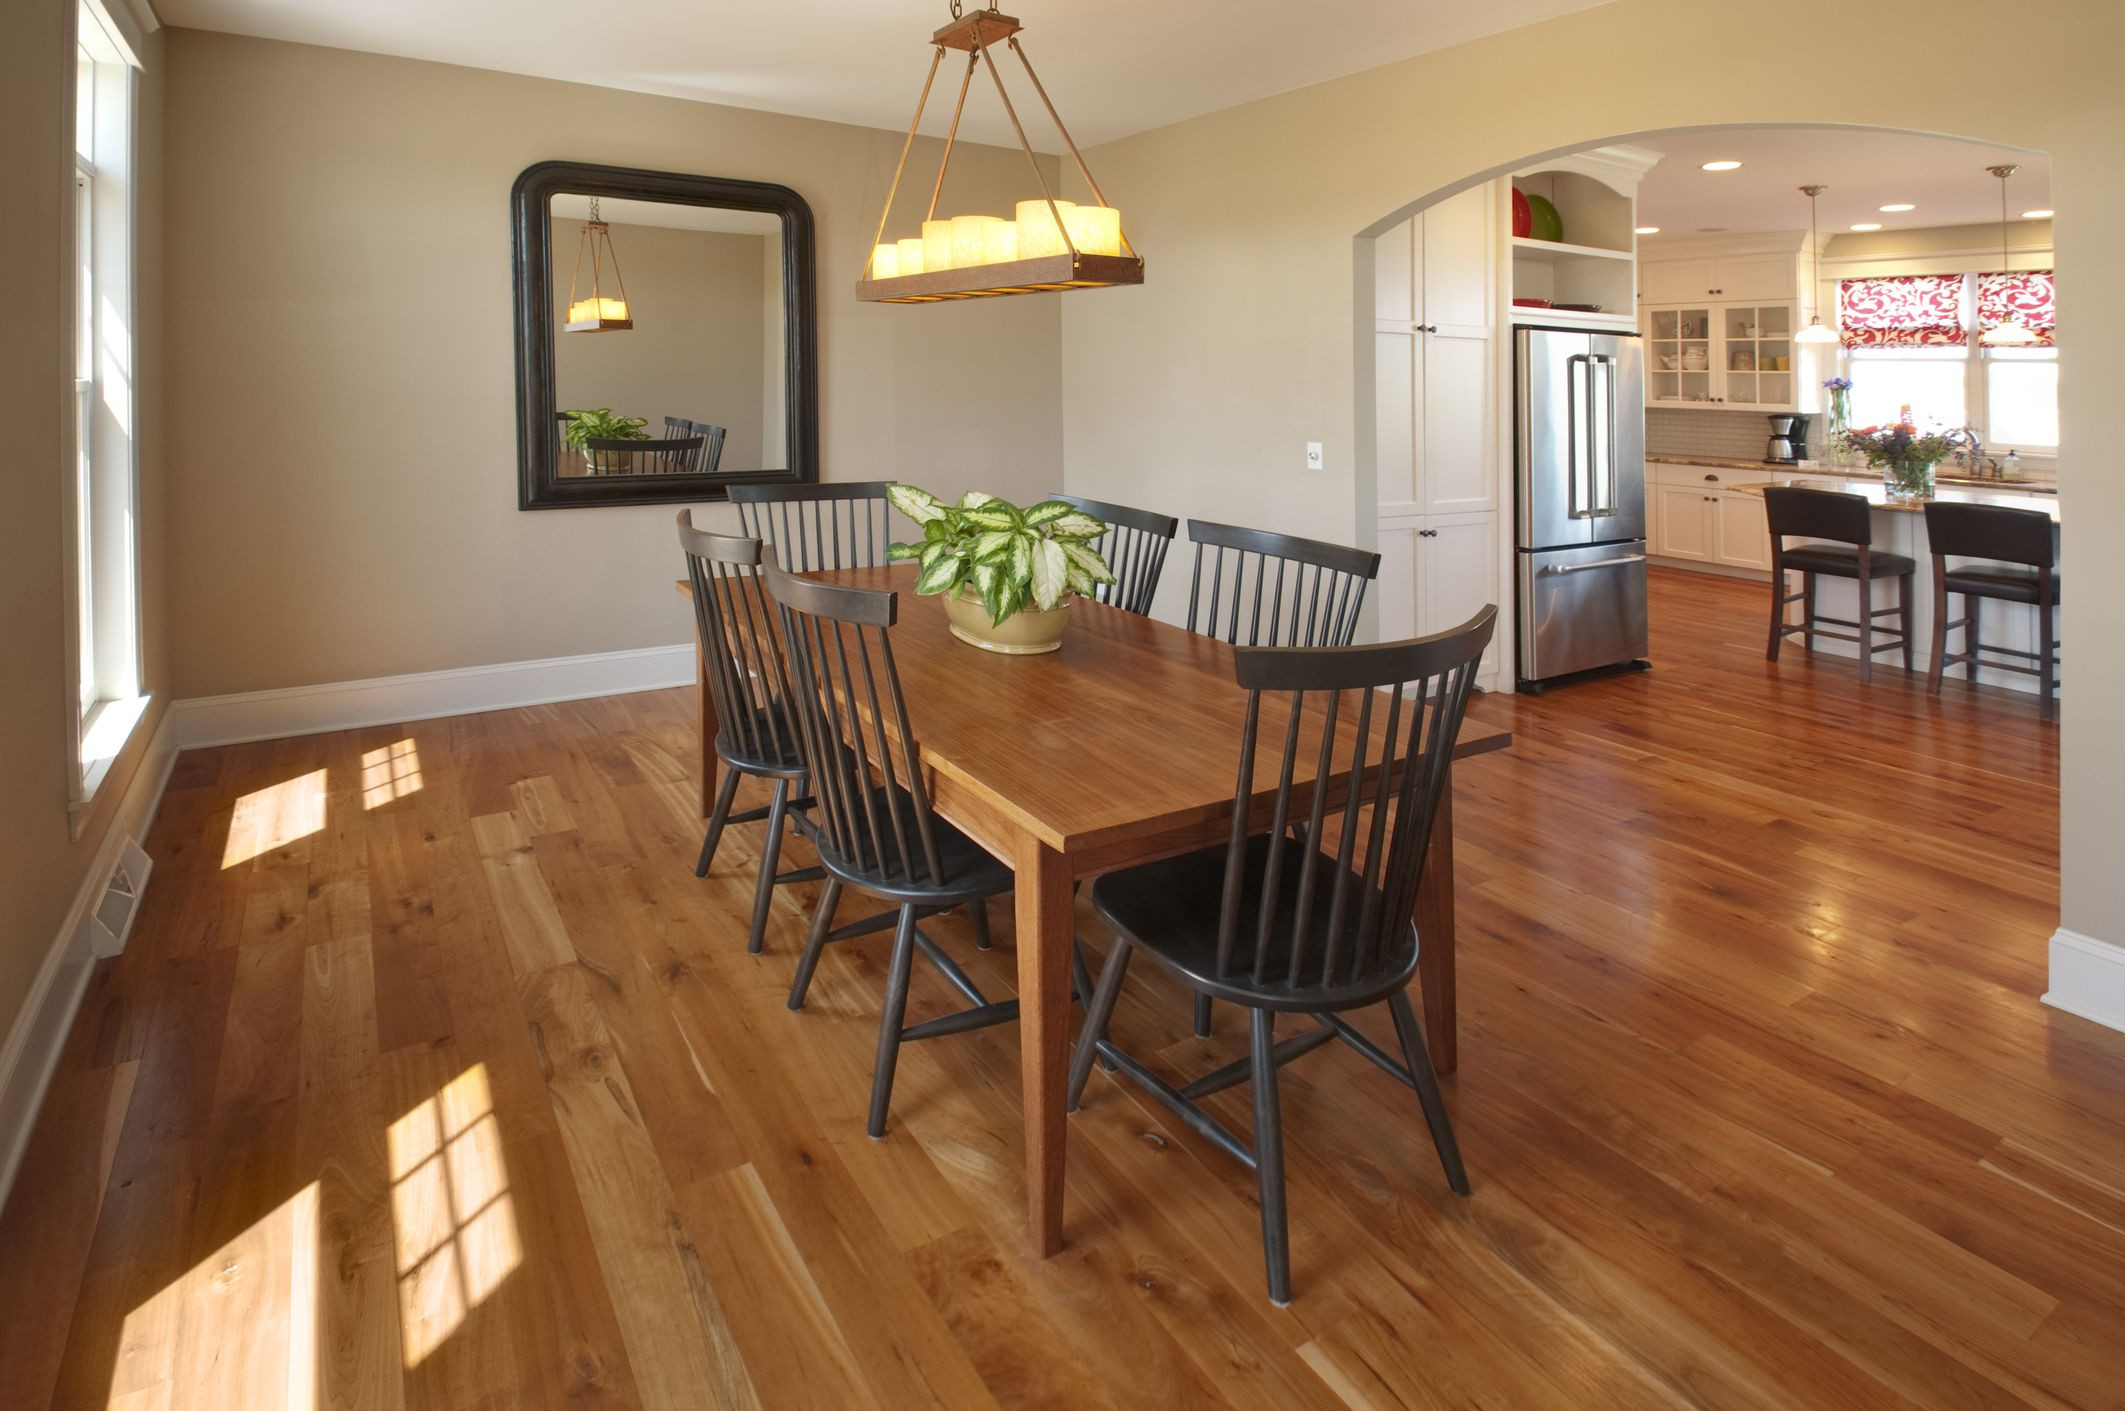 19 Fabulous Cost Of Hardwood Floors Compared to Carpet 2024 free download cost of hardwood floors compared to carpet of a beginners overview of hardwood flooring in hardwood 02 58f6d0a53df78ca1599e5b0d